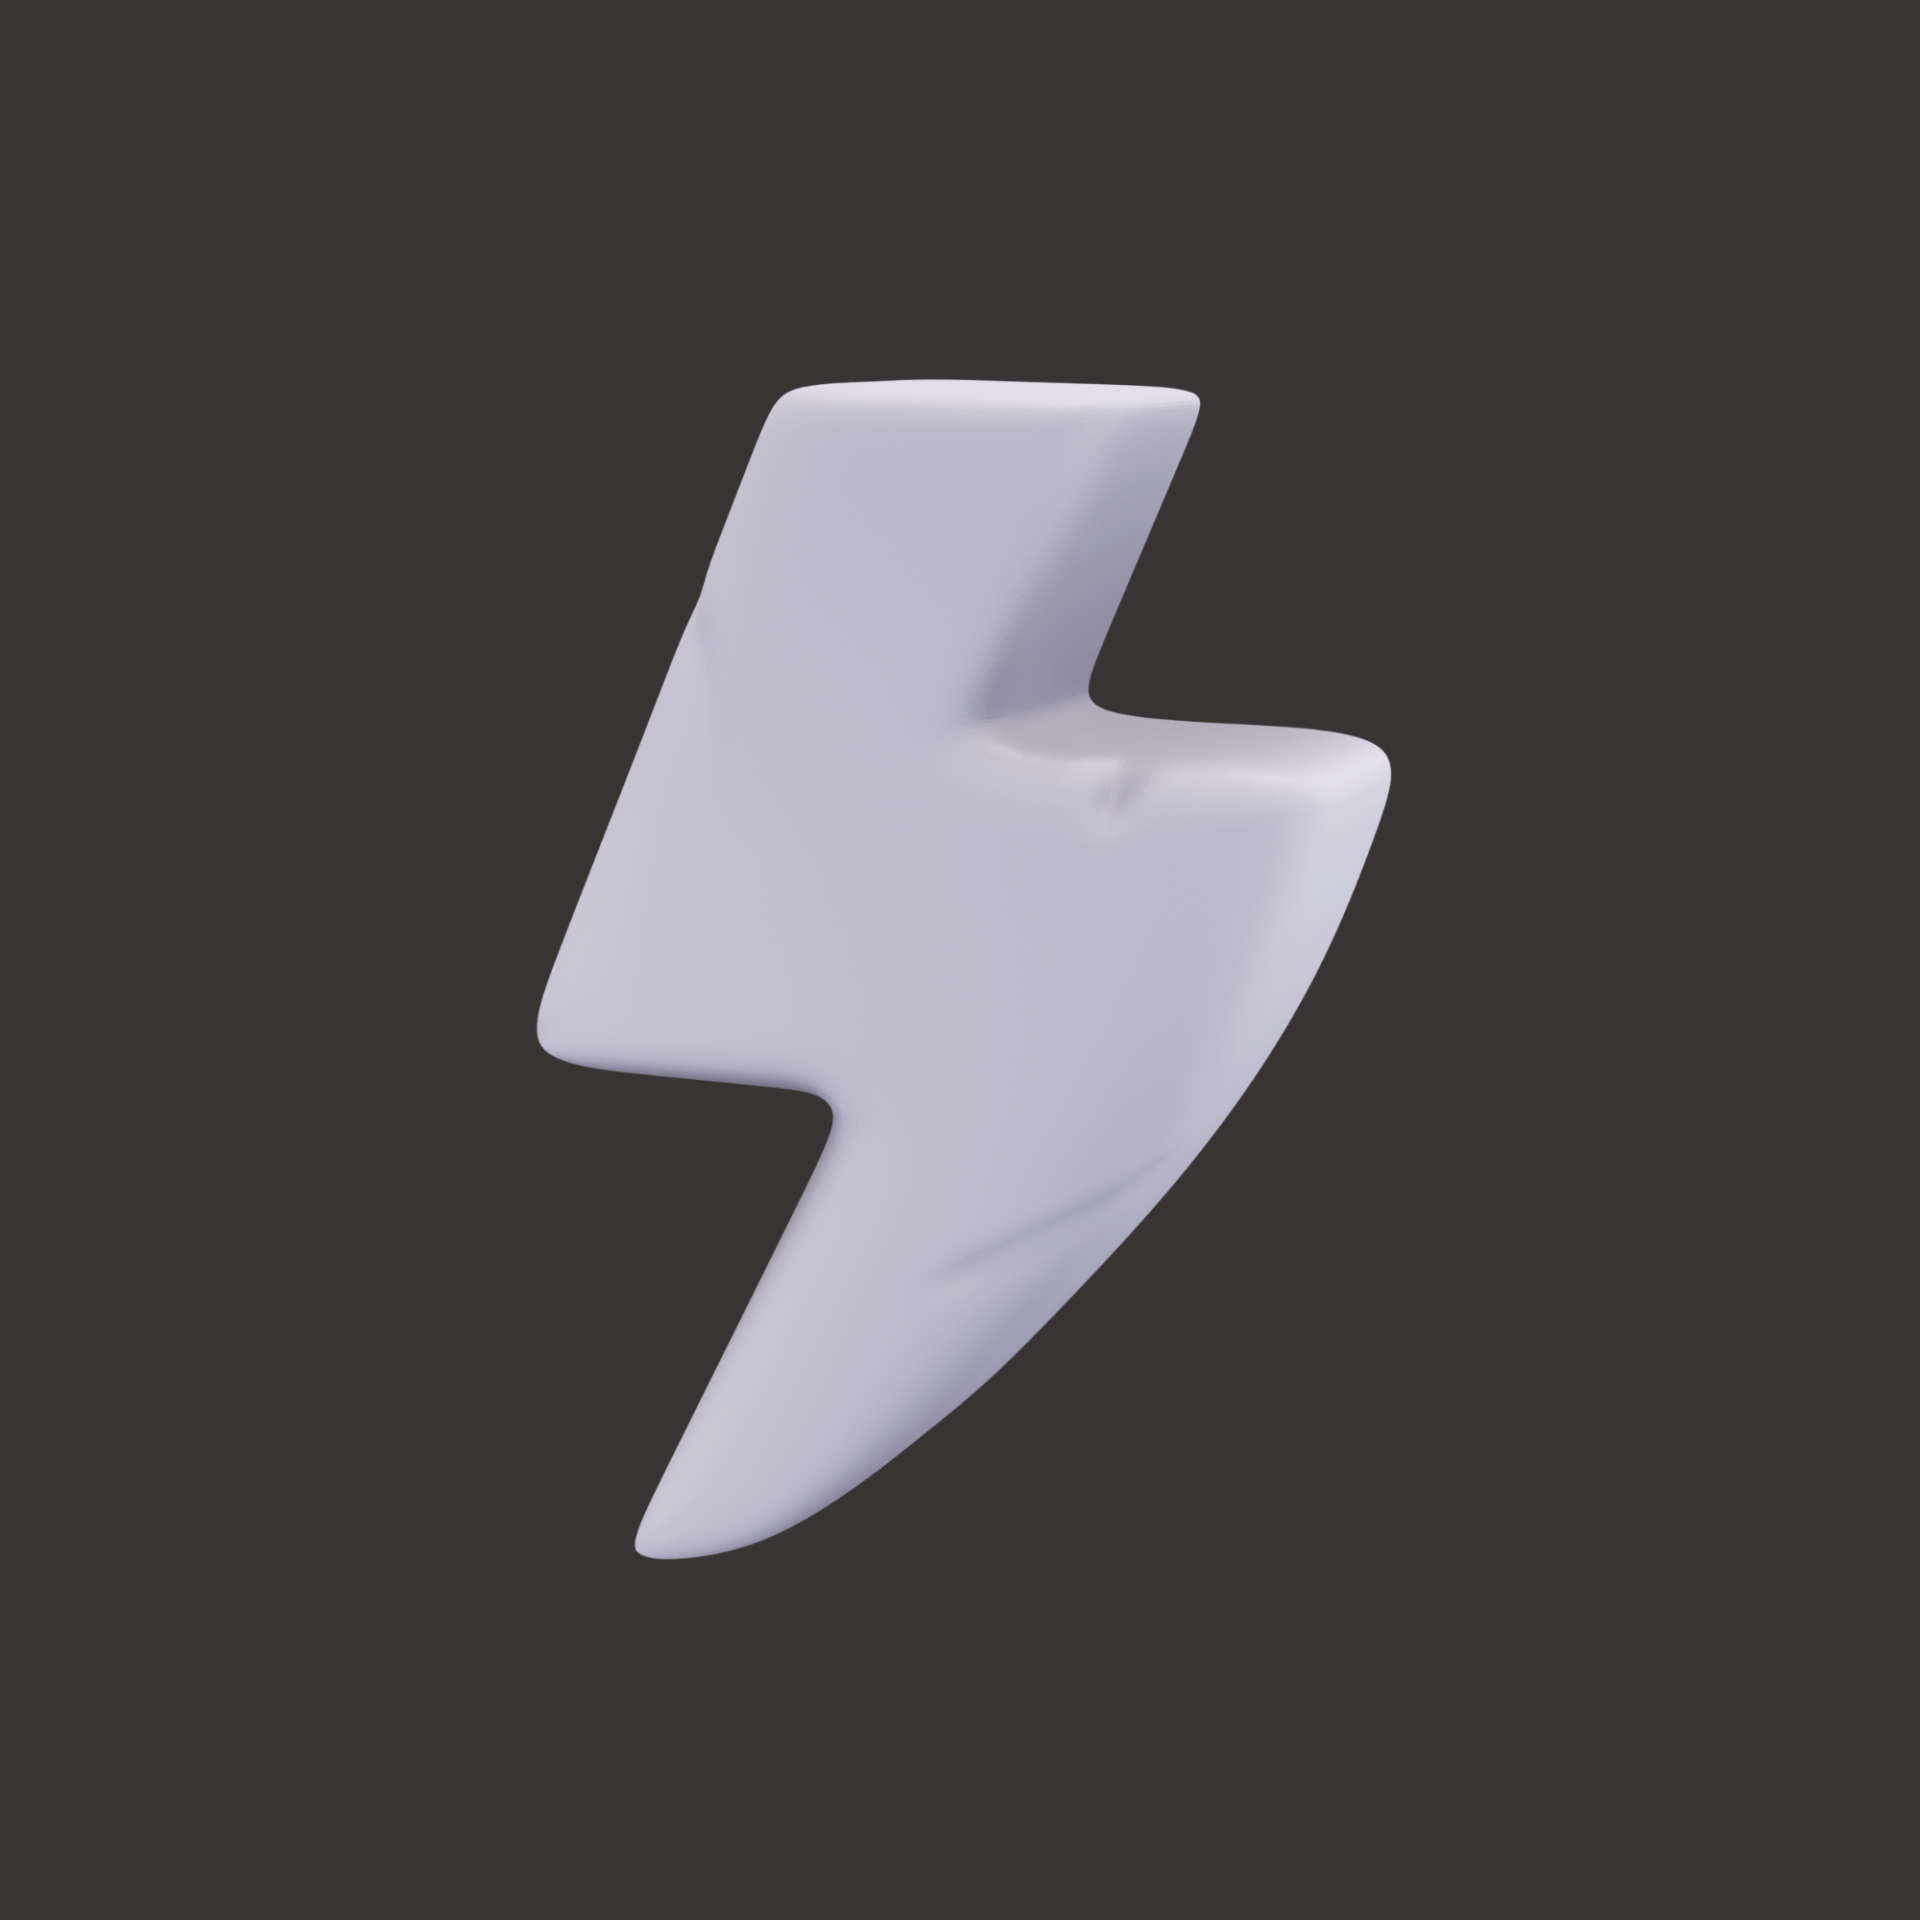 rpg-game-power-energy-thunder-flash-game-ui-assets-3d-icon